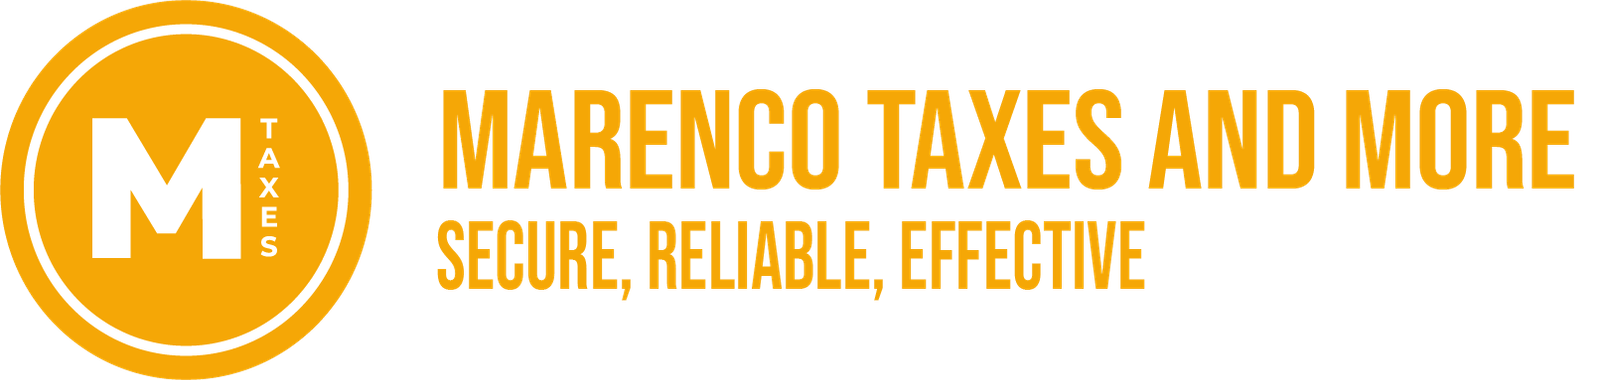 Marenco Taxes and More LLC